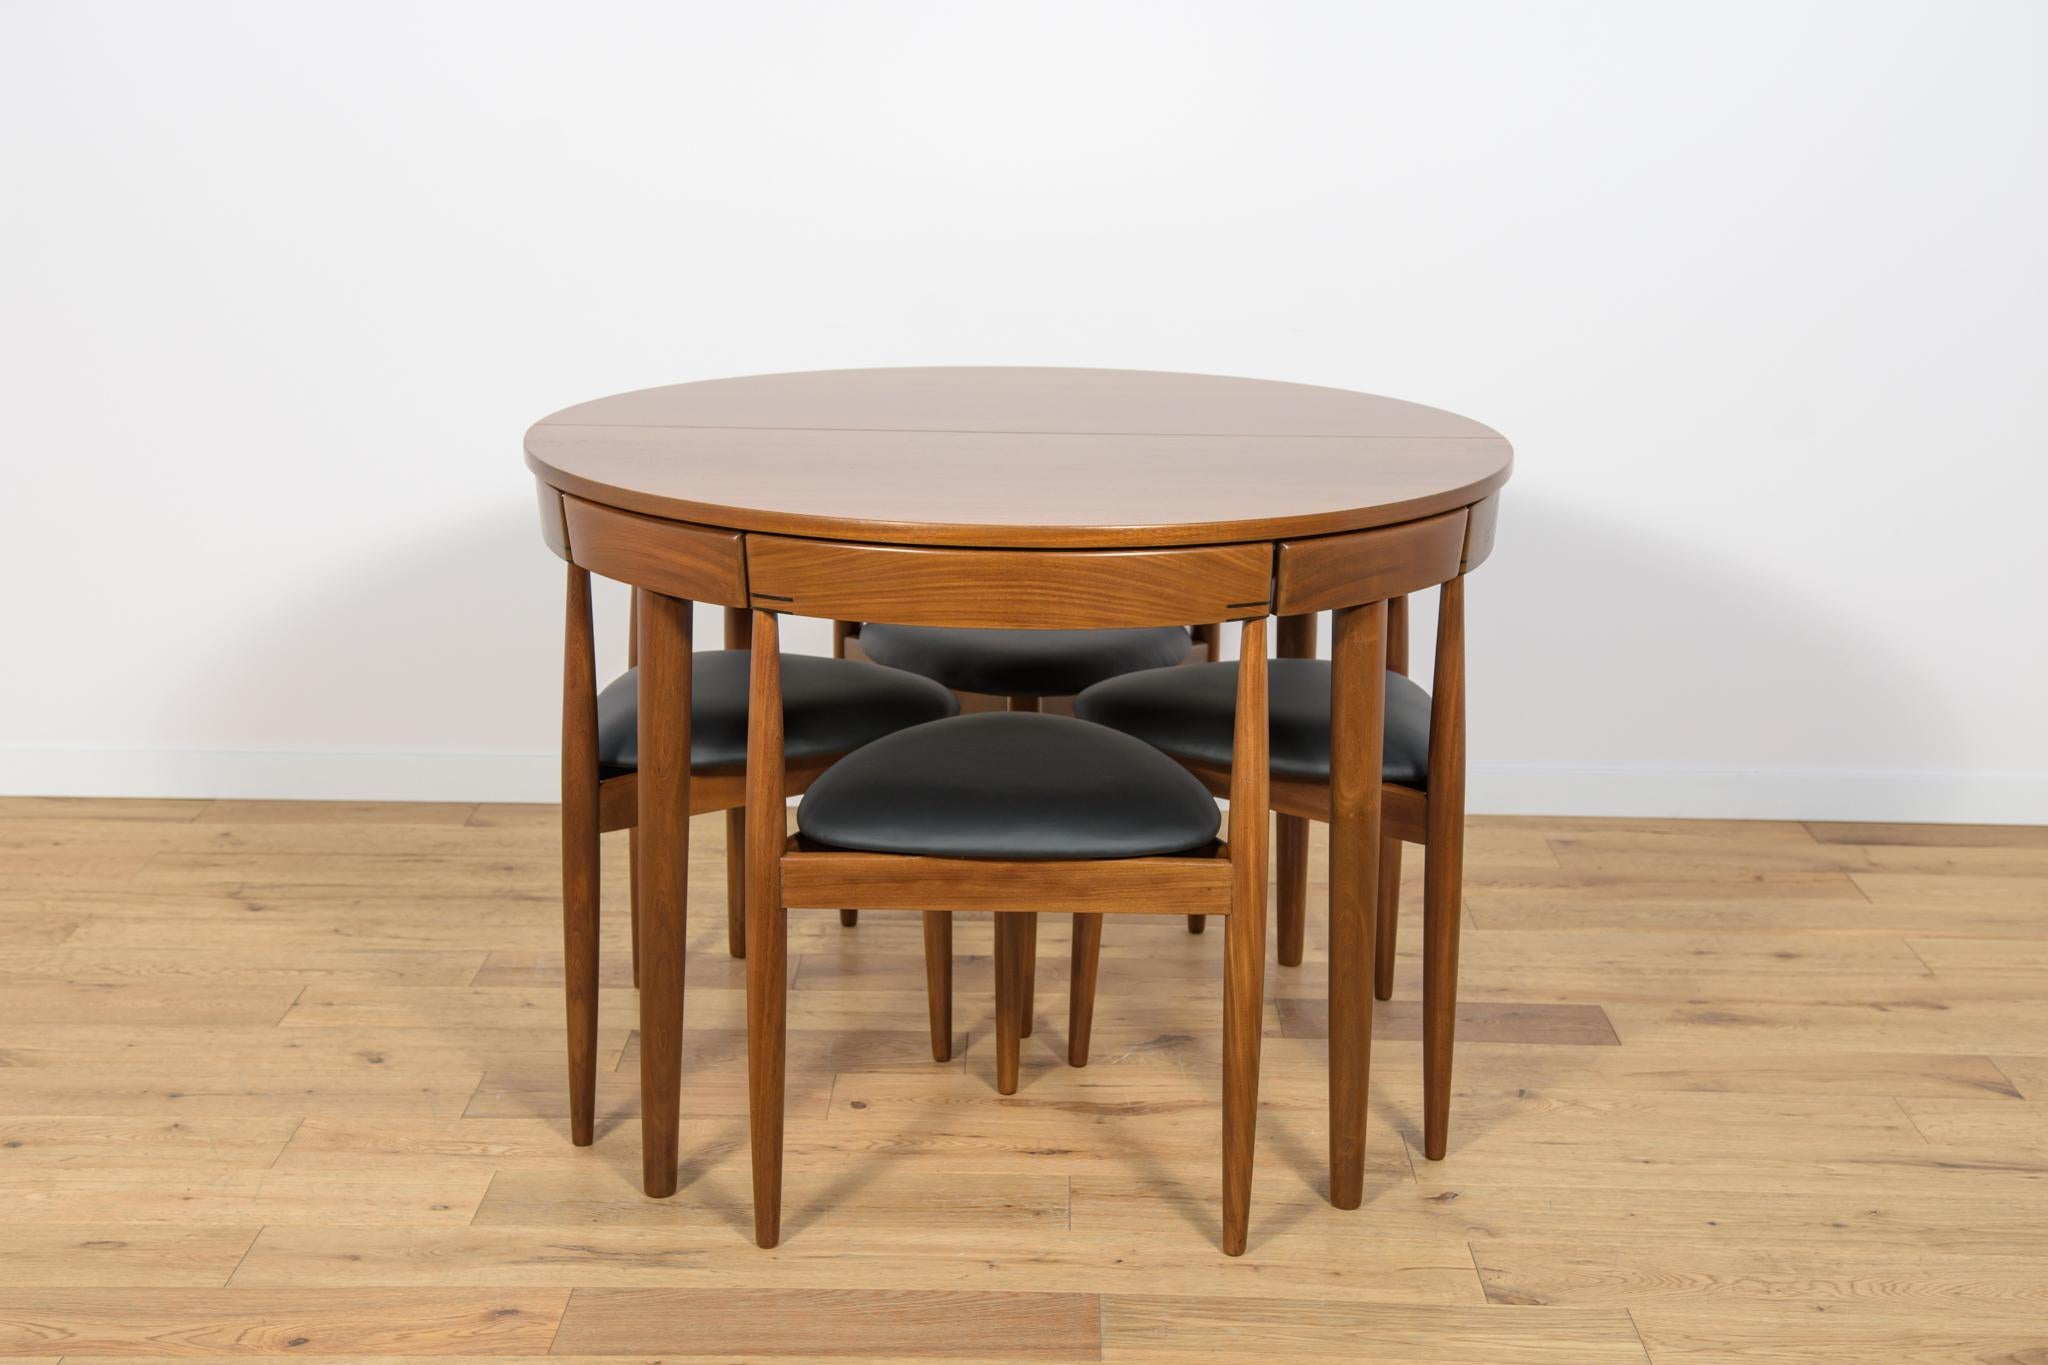 The set was designed by the Danish designer Hans Olsen for the Frem Røjle factory in the 1950s. It consists of an extendable table and four chairs. The triangular seat of the chairs is placed on three legs. Their structure is made of teak wood, the